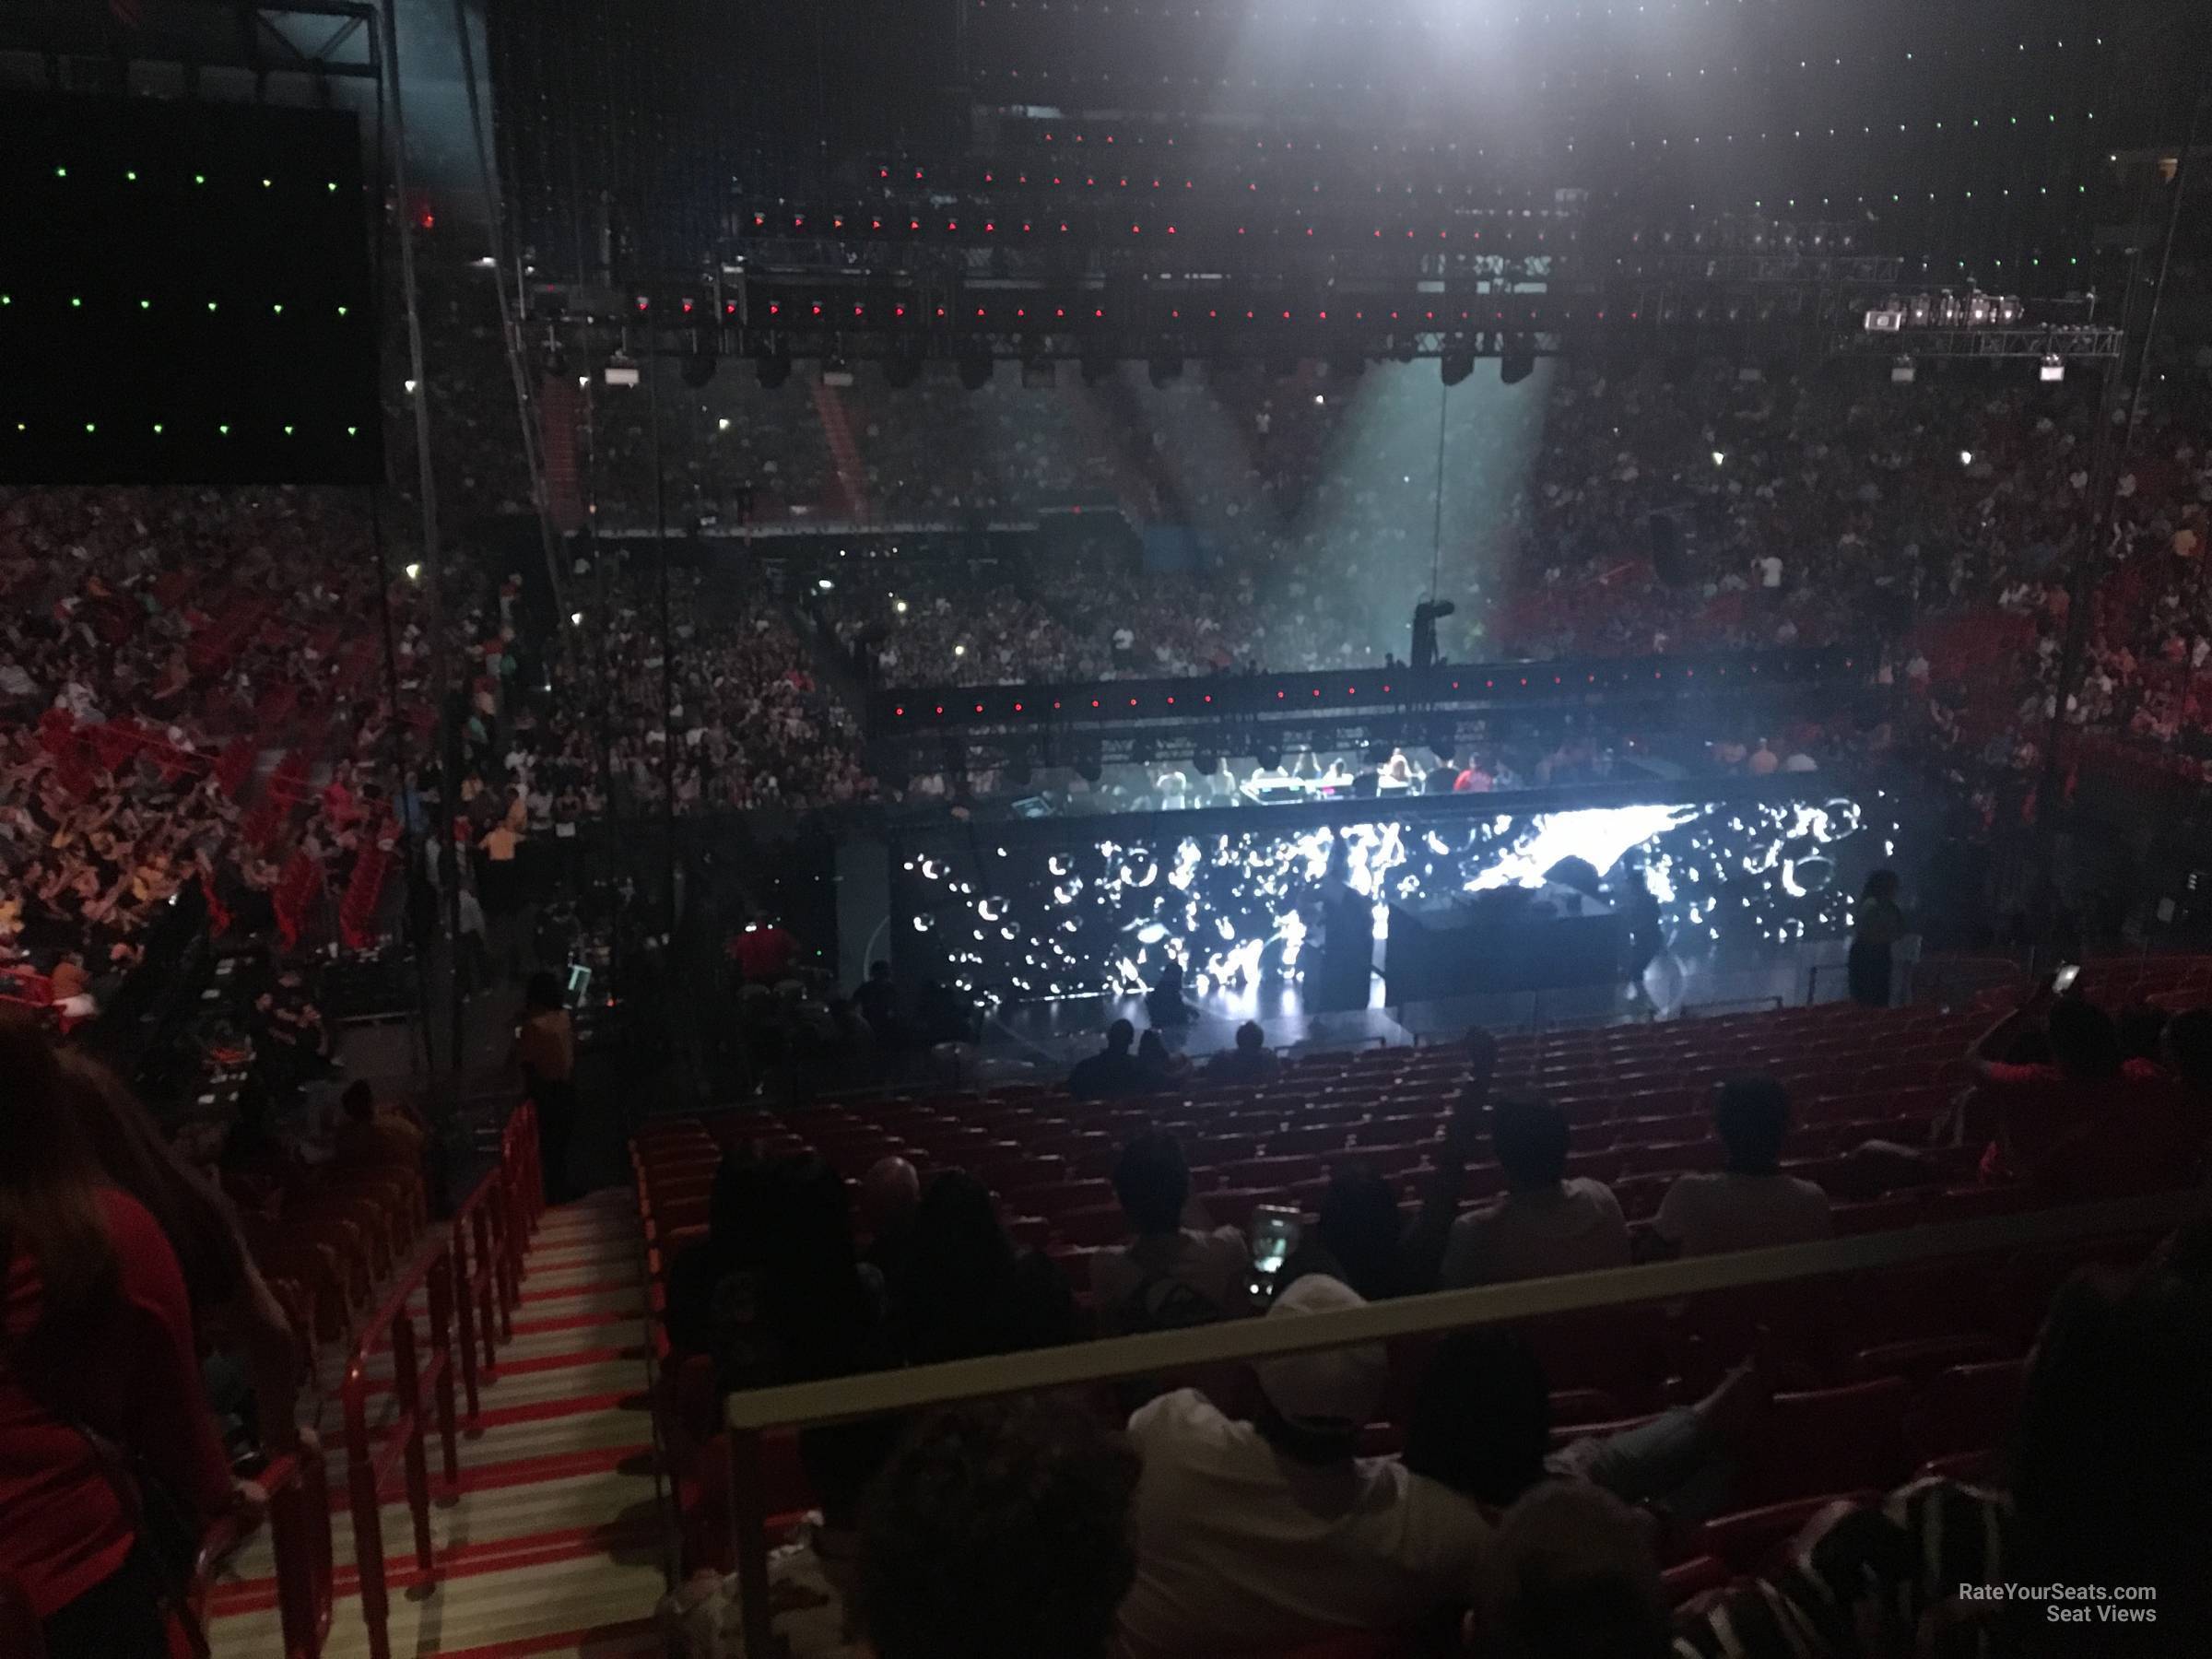 section 102, row 37 seat view  for concert - ftx arena